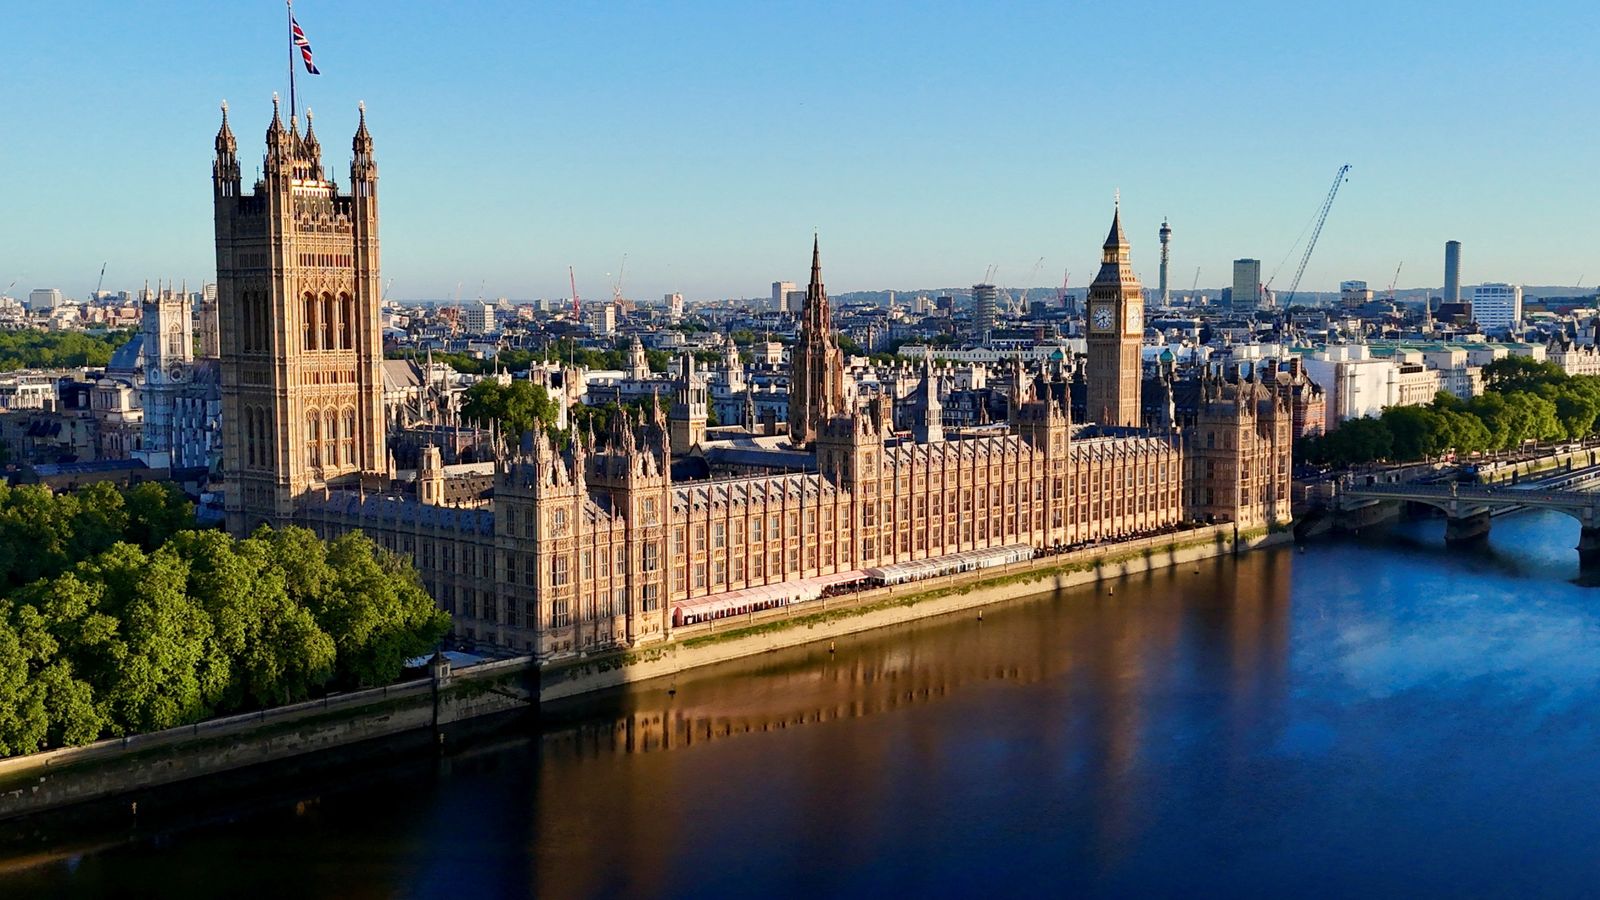 Man arrested over unsolicited messages sent to MPs and others in Westminster honeytrap scandal